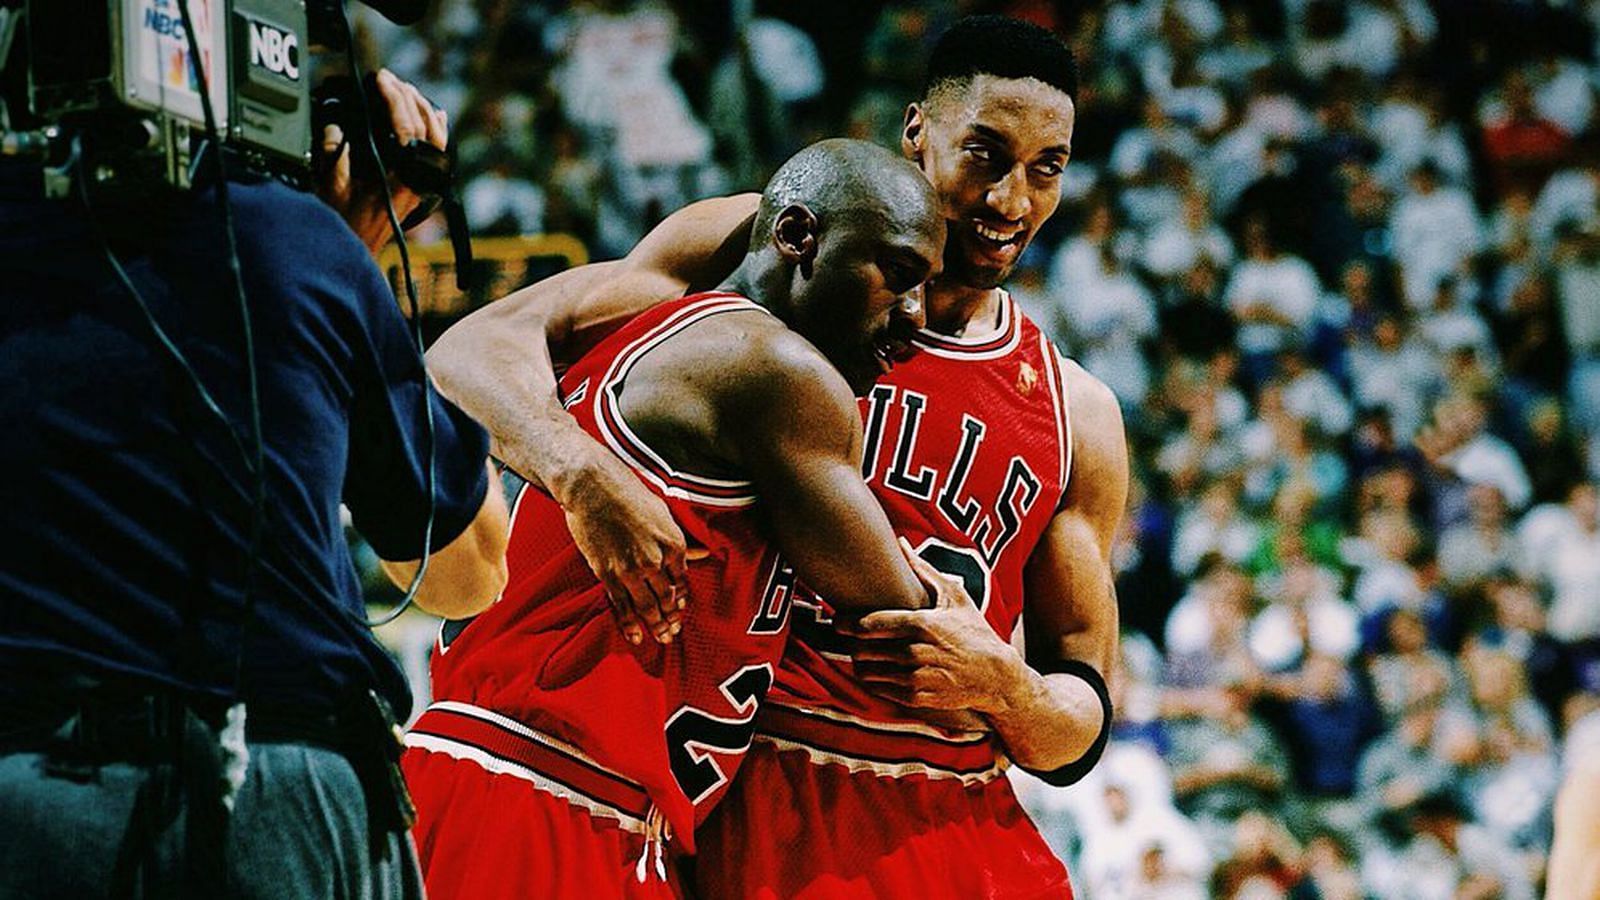 Scottie Pippen holding Michael Jordan during Game 5 of the 1997 NBA Finals